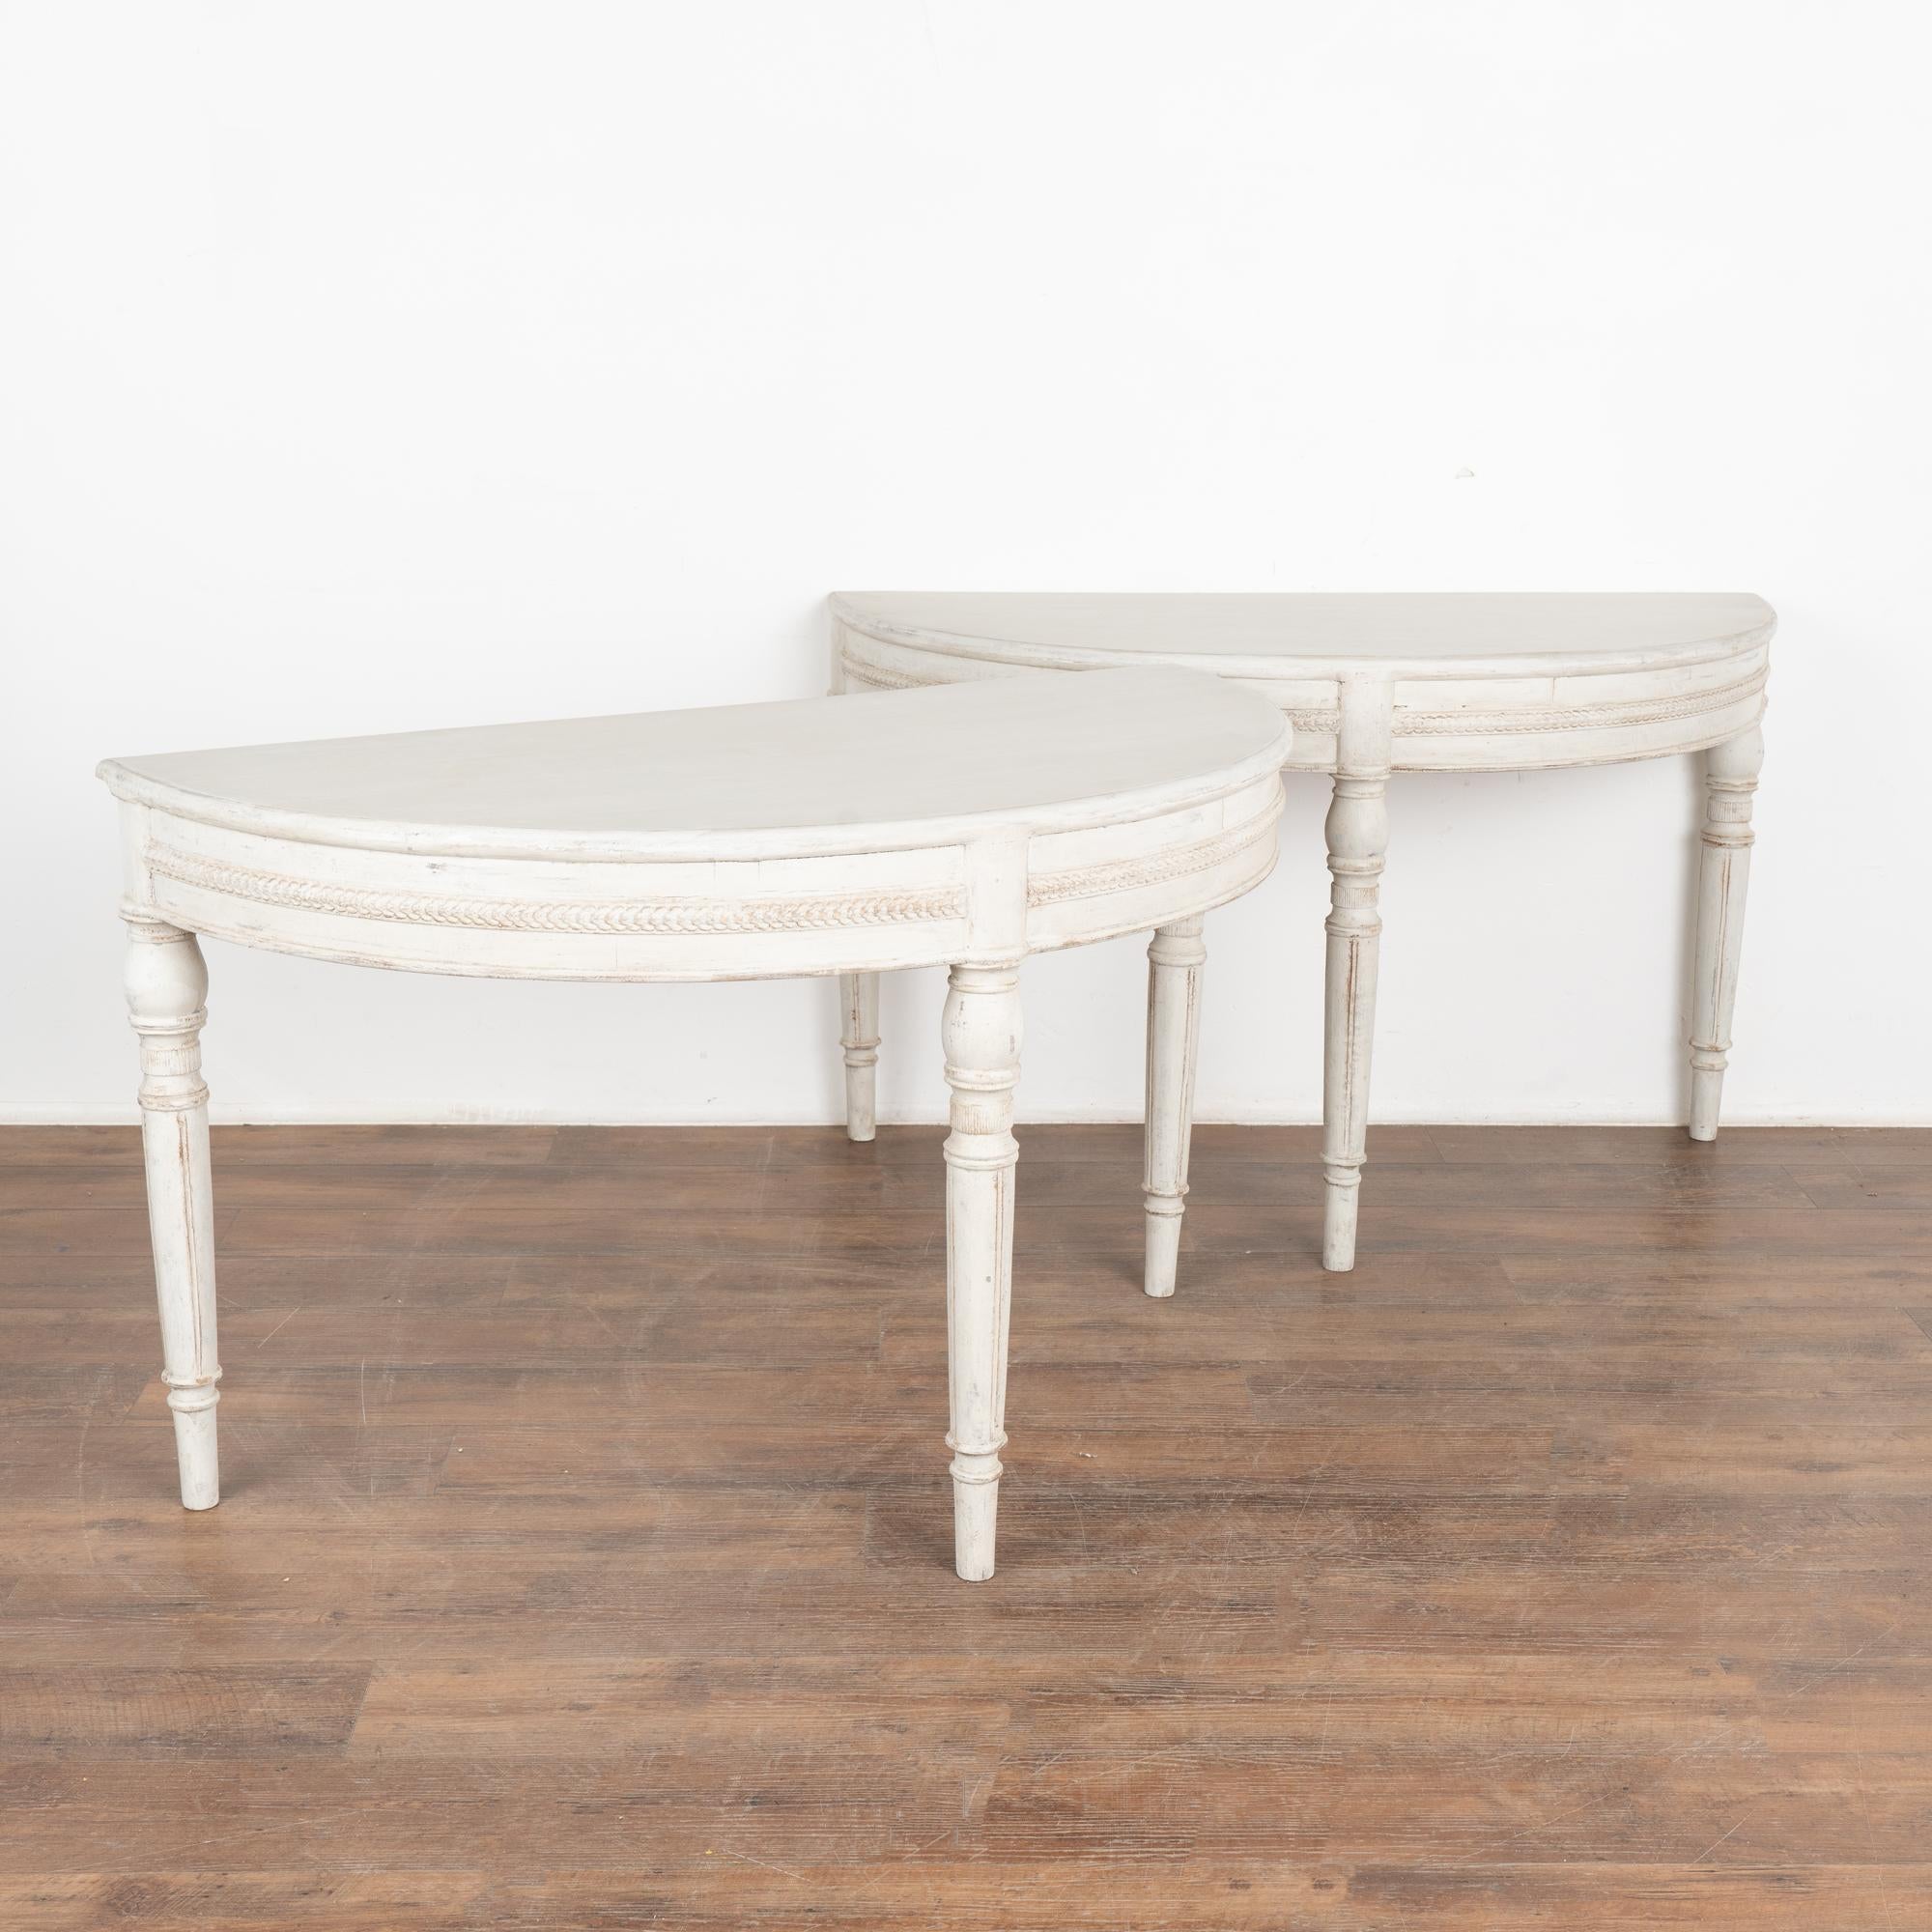 Pair, Gustavian large demi-lune side tables or consoles. 
Turned legs and decorative carving along skirt add to the timeless appeal of these demilunes.
Newer professionally applied layered white painted finish, slightly distressed to fit age and